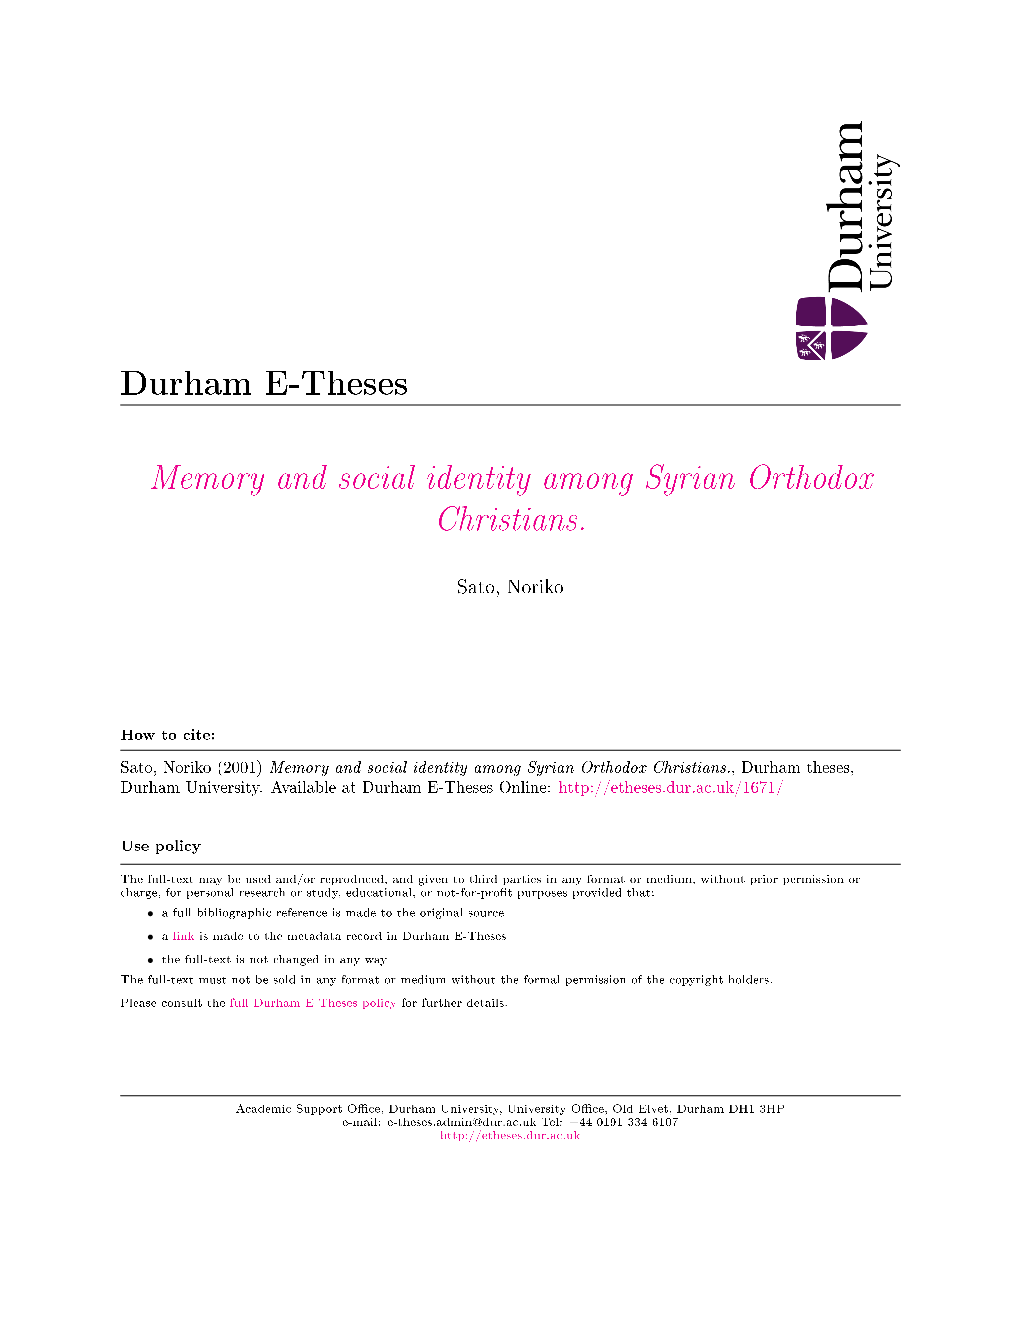 Memory and Social Identity Among Syrian Orthodox Christians